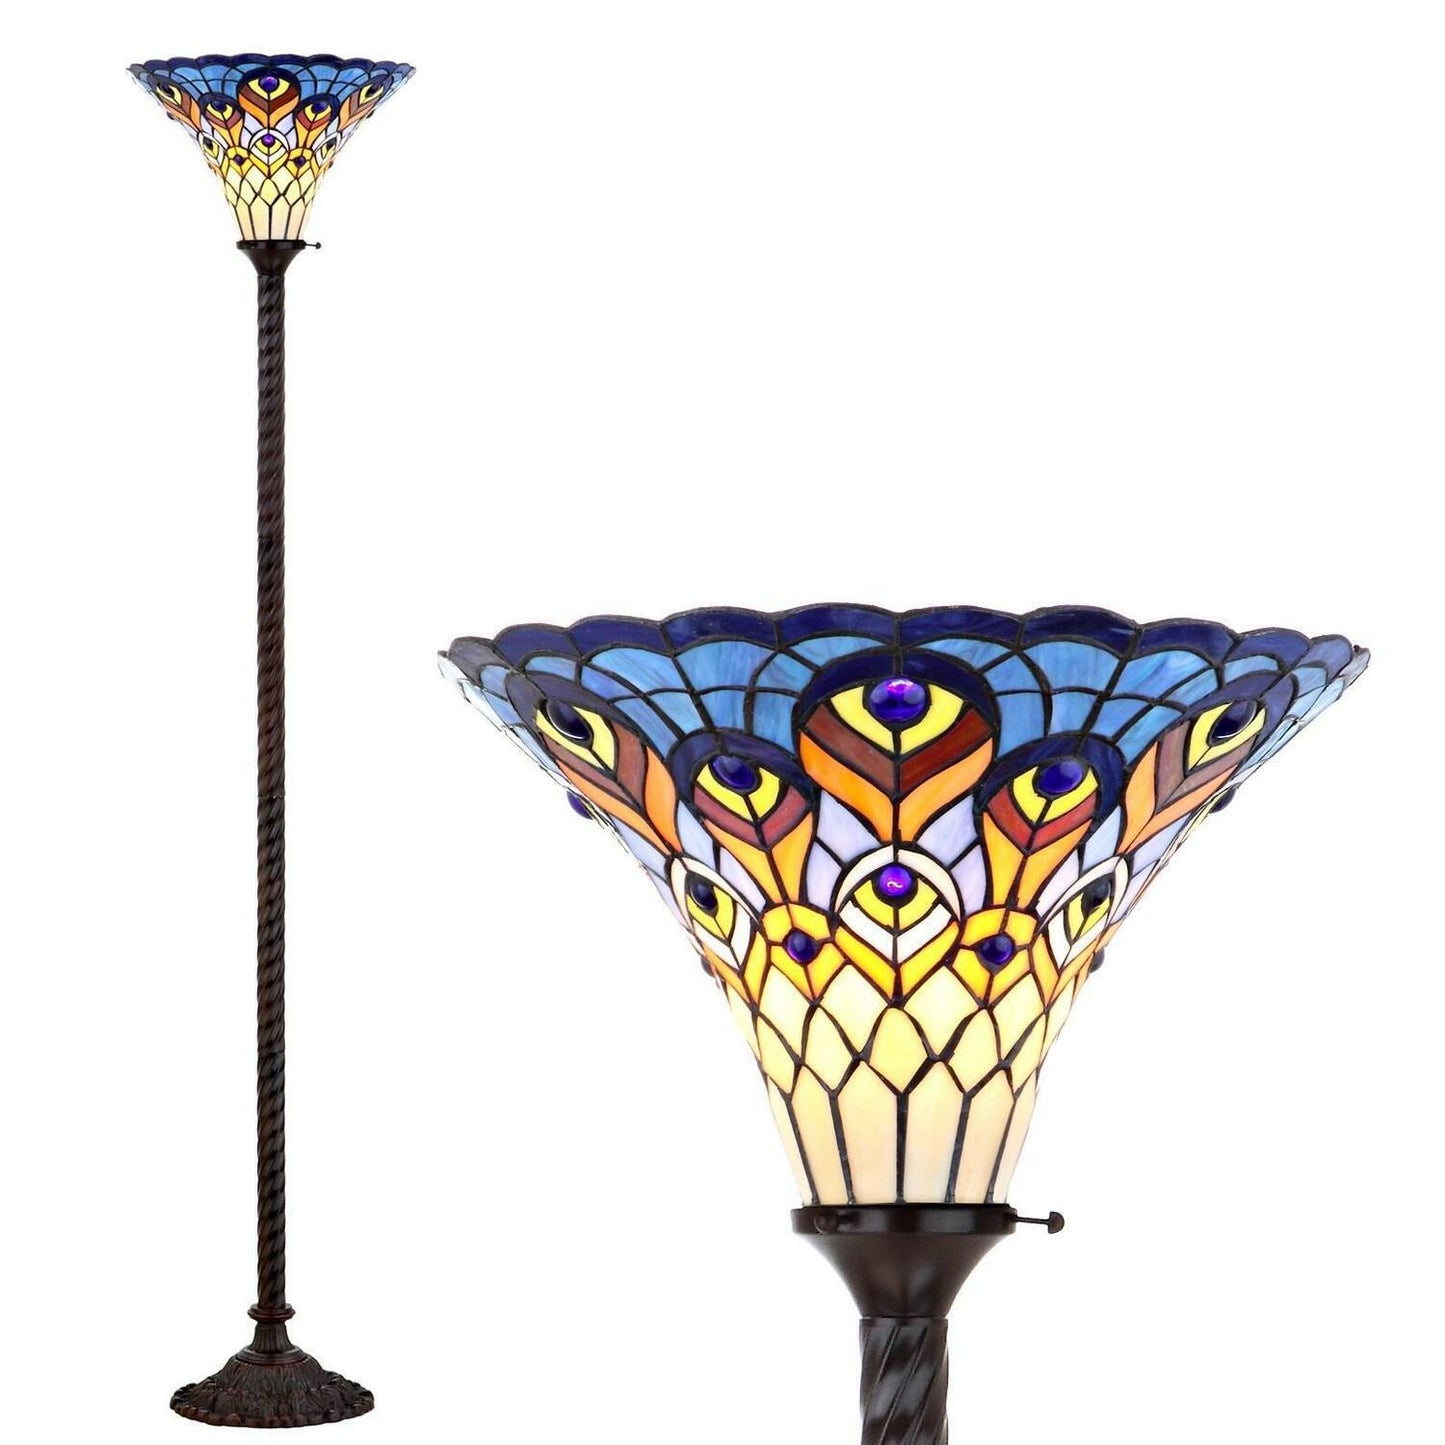 Tiffany Style Peacock 70in Stained Glass Traditional Torchiere Floor Lamp